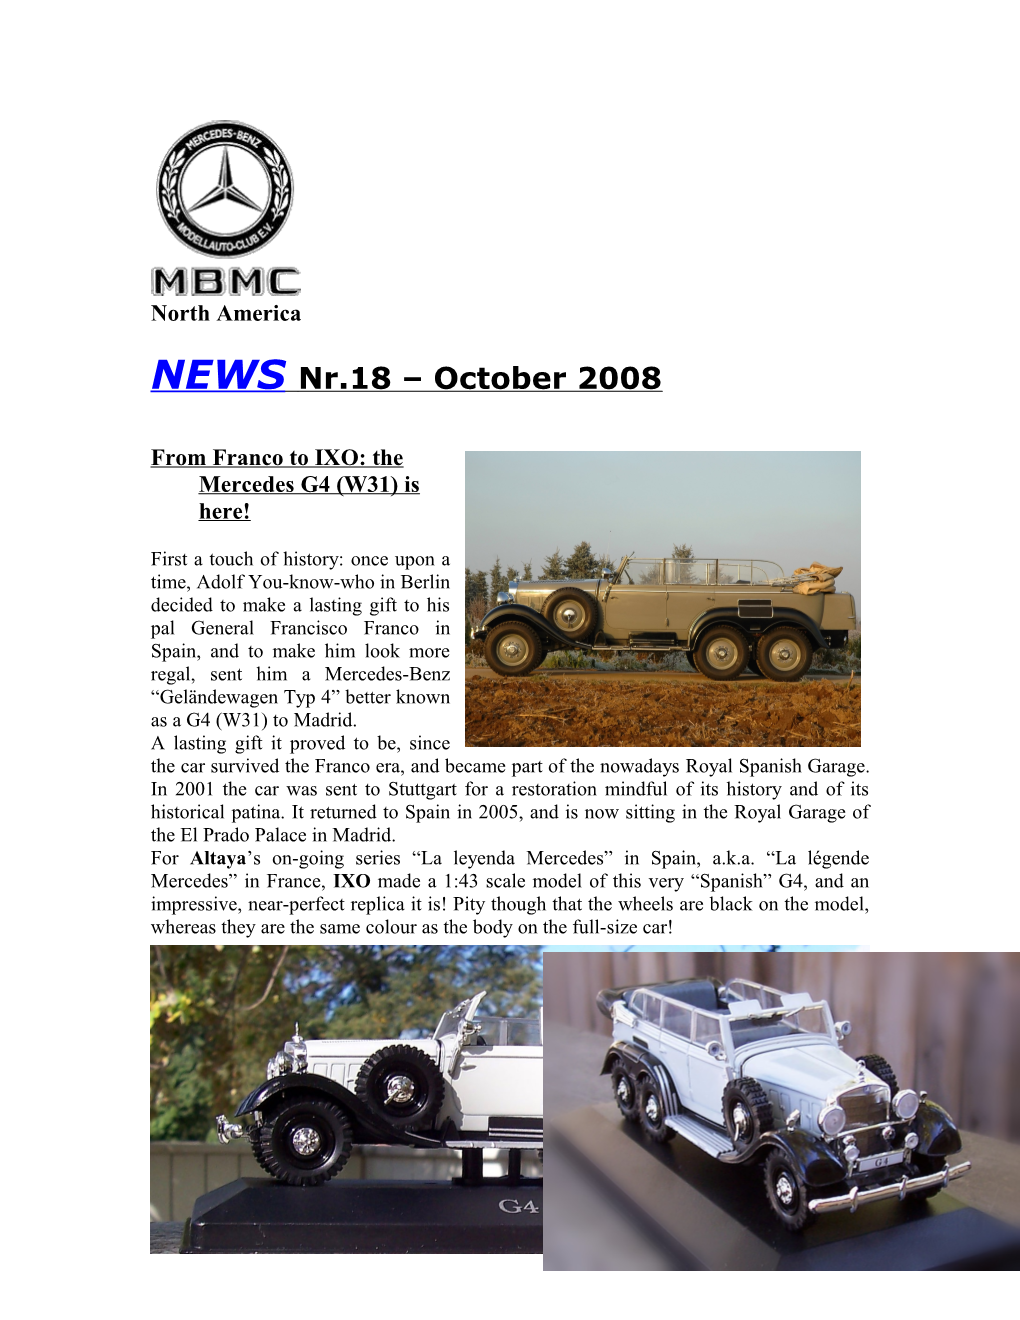 From Franco to IXO: the Mercedes G4 (W31) Is Here!